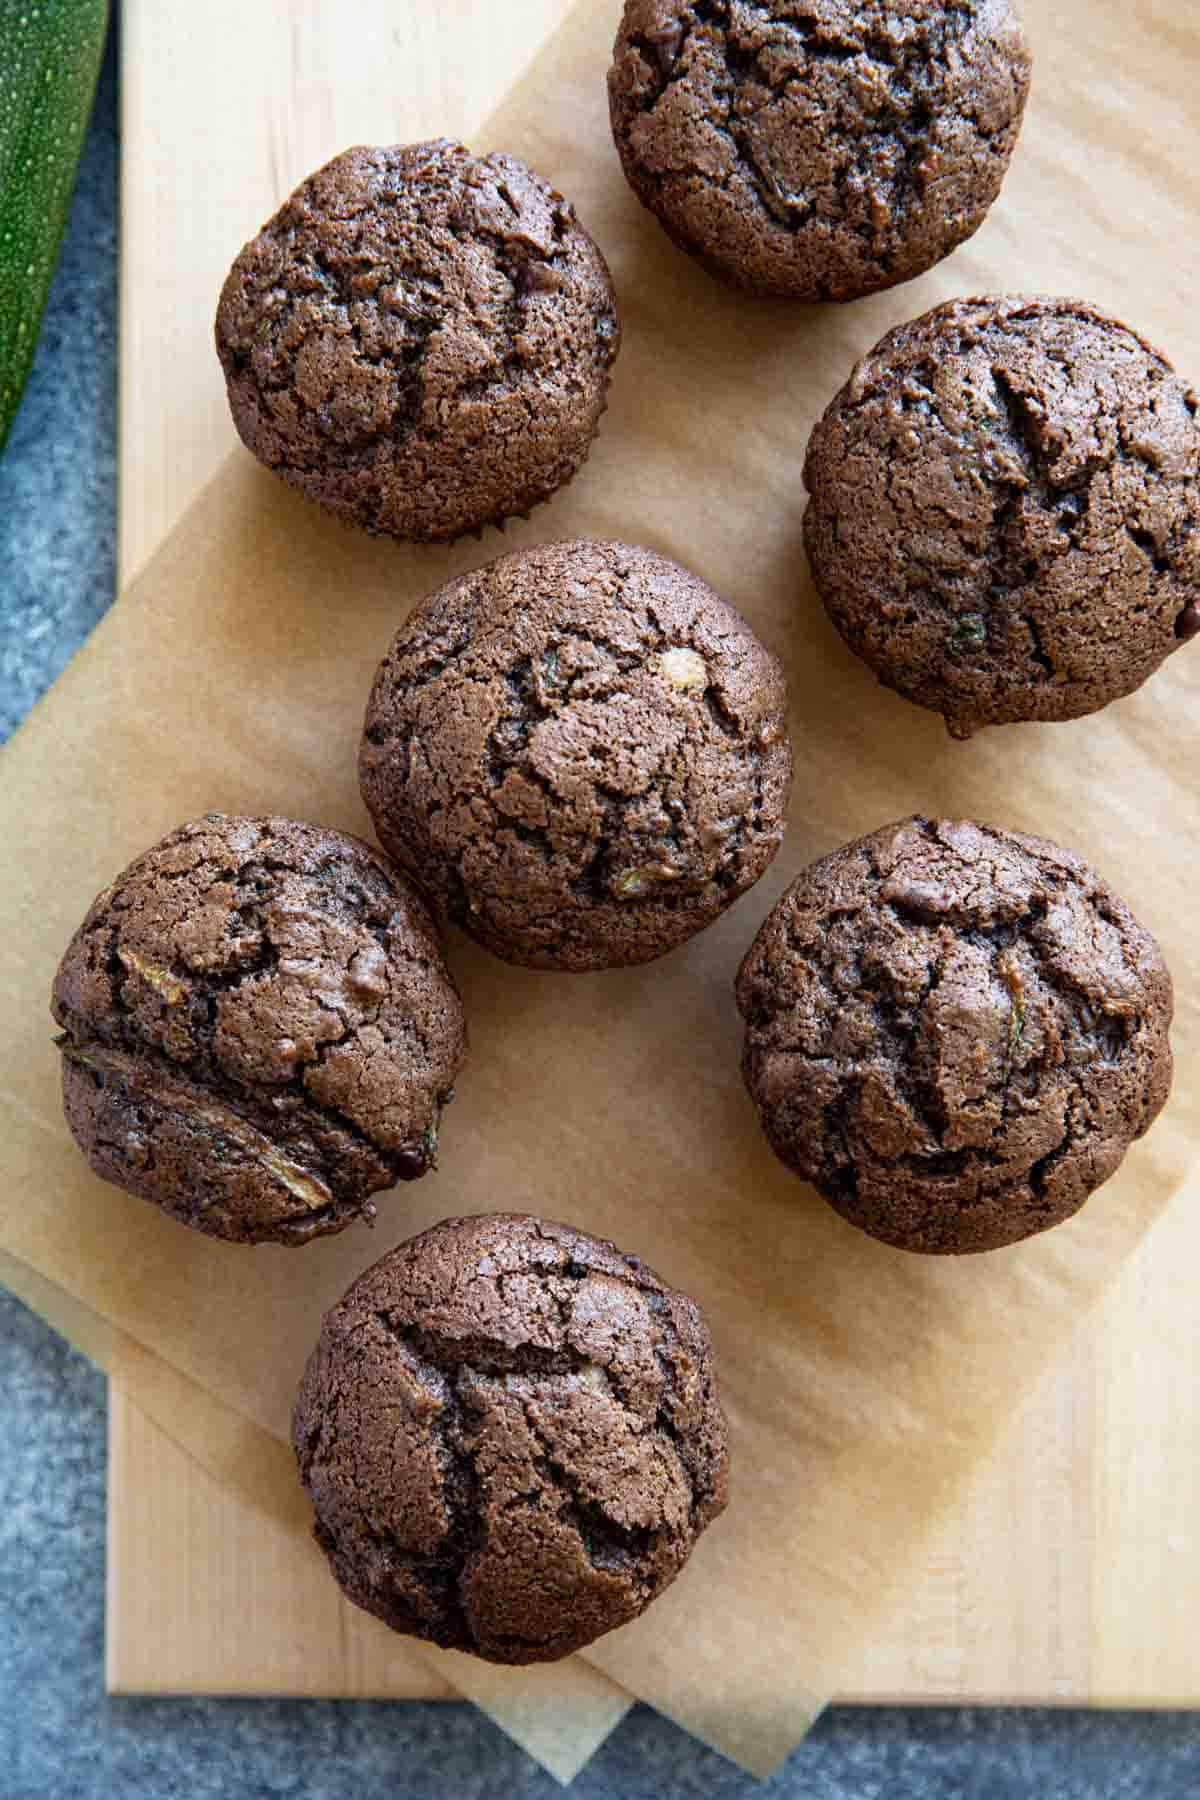 Chocolate zucchini muffins on parchment paper on top of a wooden board.